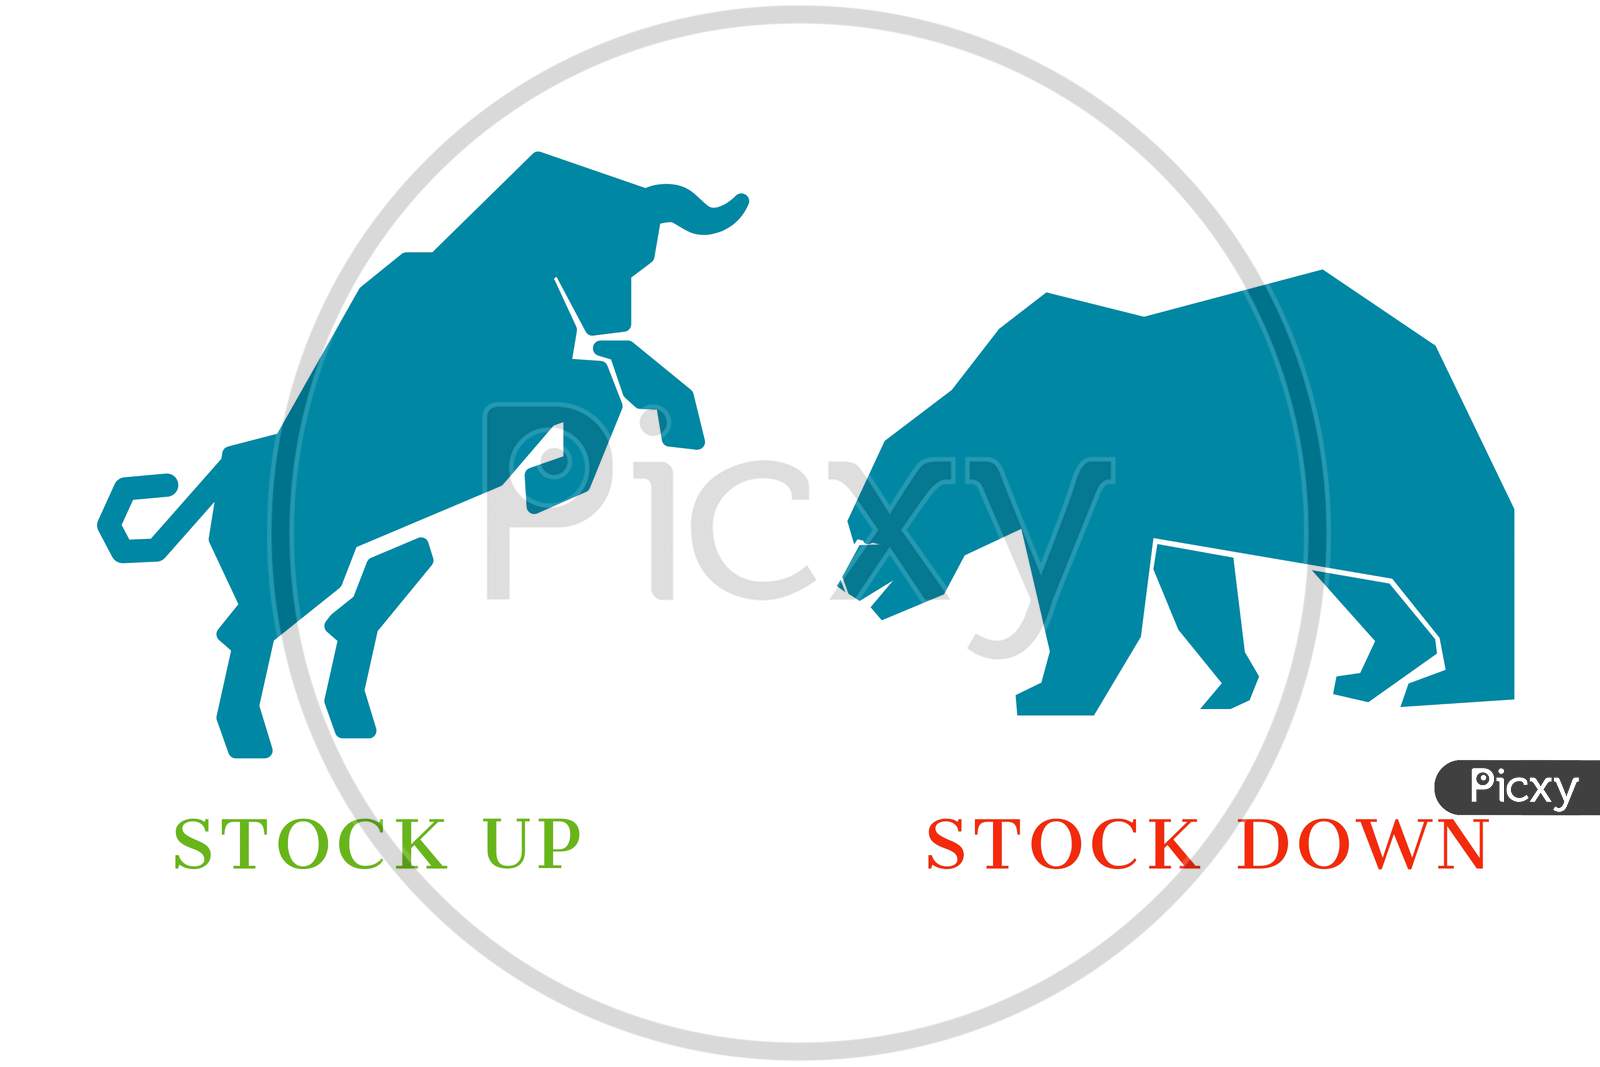 sensex today: Bulls in Action! Nifty crosses 21,600 for the first time;  Sensex rises nearly 500 points tracking global market mood - The Economic  Times